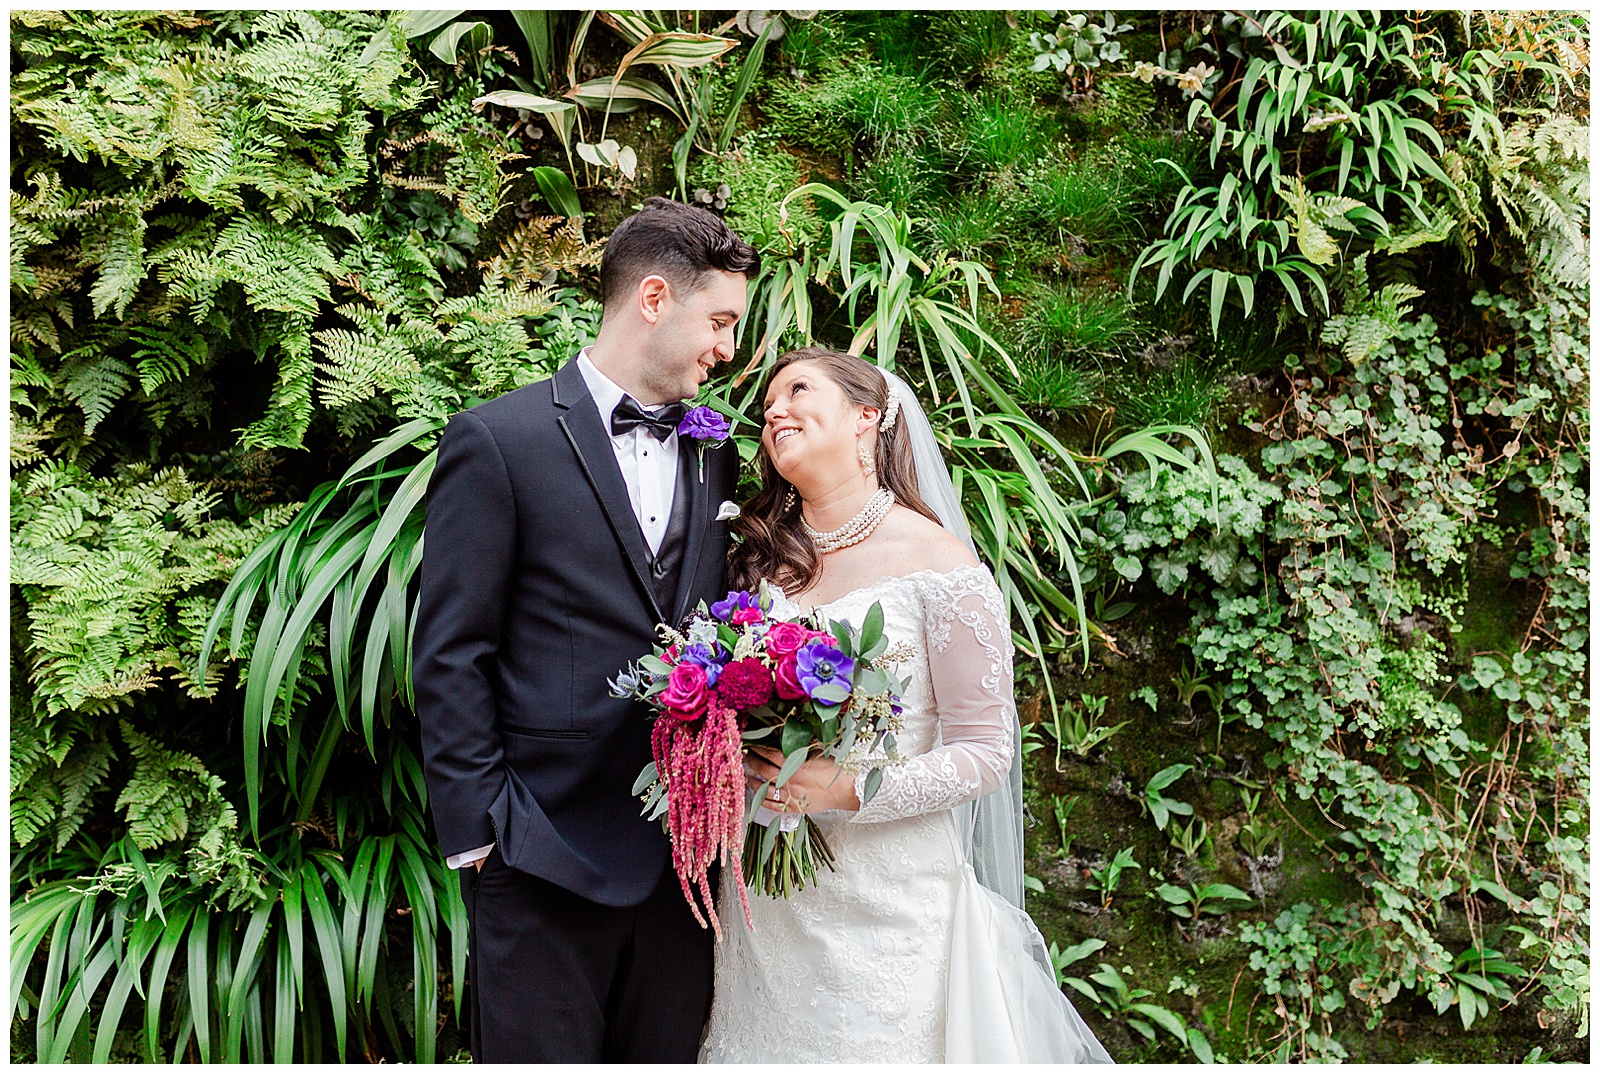 💍 bride groom outdoor wedding portraits in front of gorgeous wall of greenery florals and downtown city bridals 👰 Bride: lace wedding dress with rhinestone belt rhinestone barrette in hair down with pearls 🤵 Groom: black tux tuxedo and purple flower boutonnière 💍 Bright Colorful Summer City Wedding in Charlotte, NC with Taryn and Ryan | Kevyn Dixon Photography